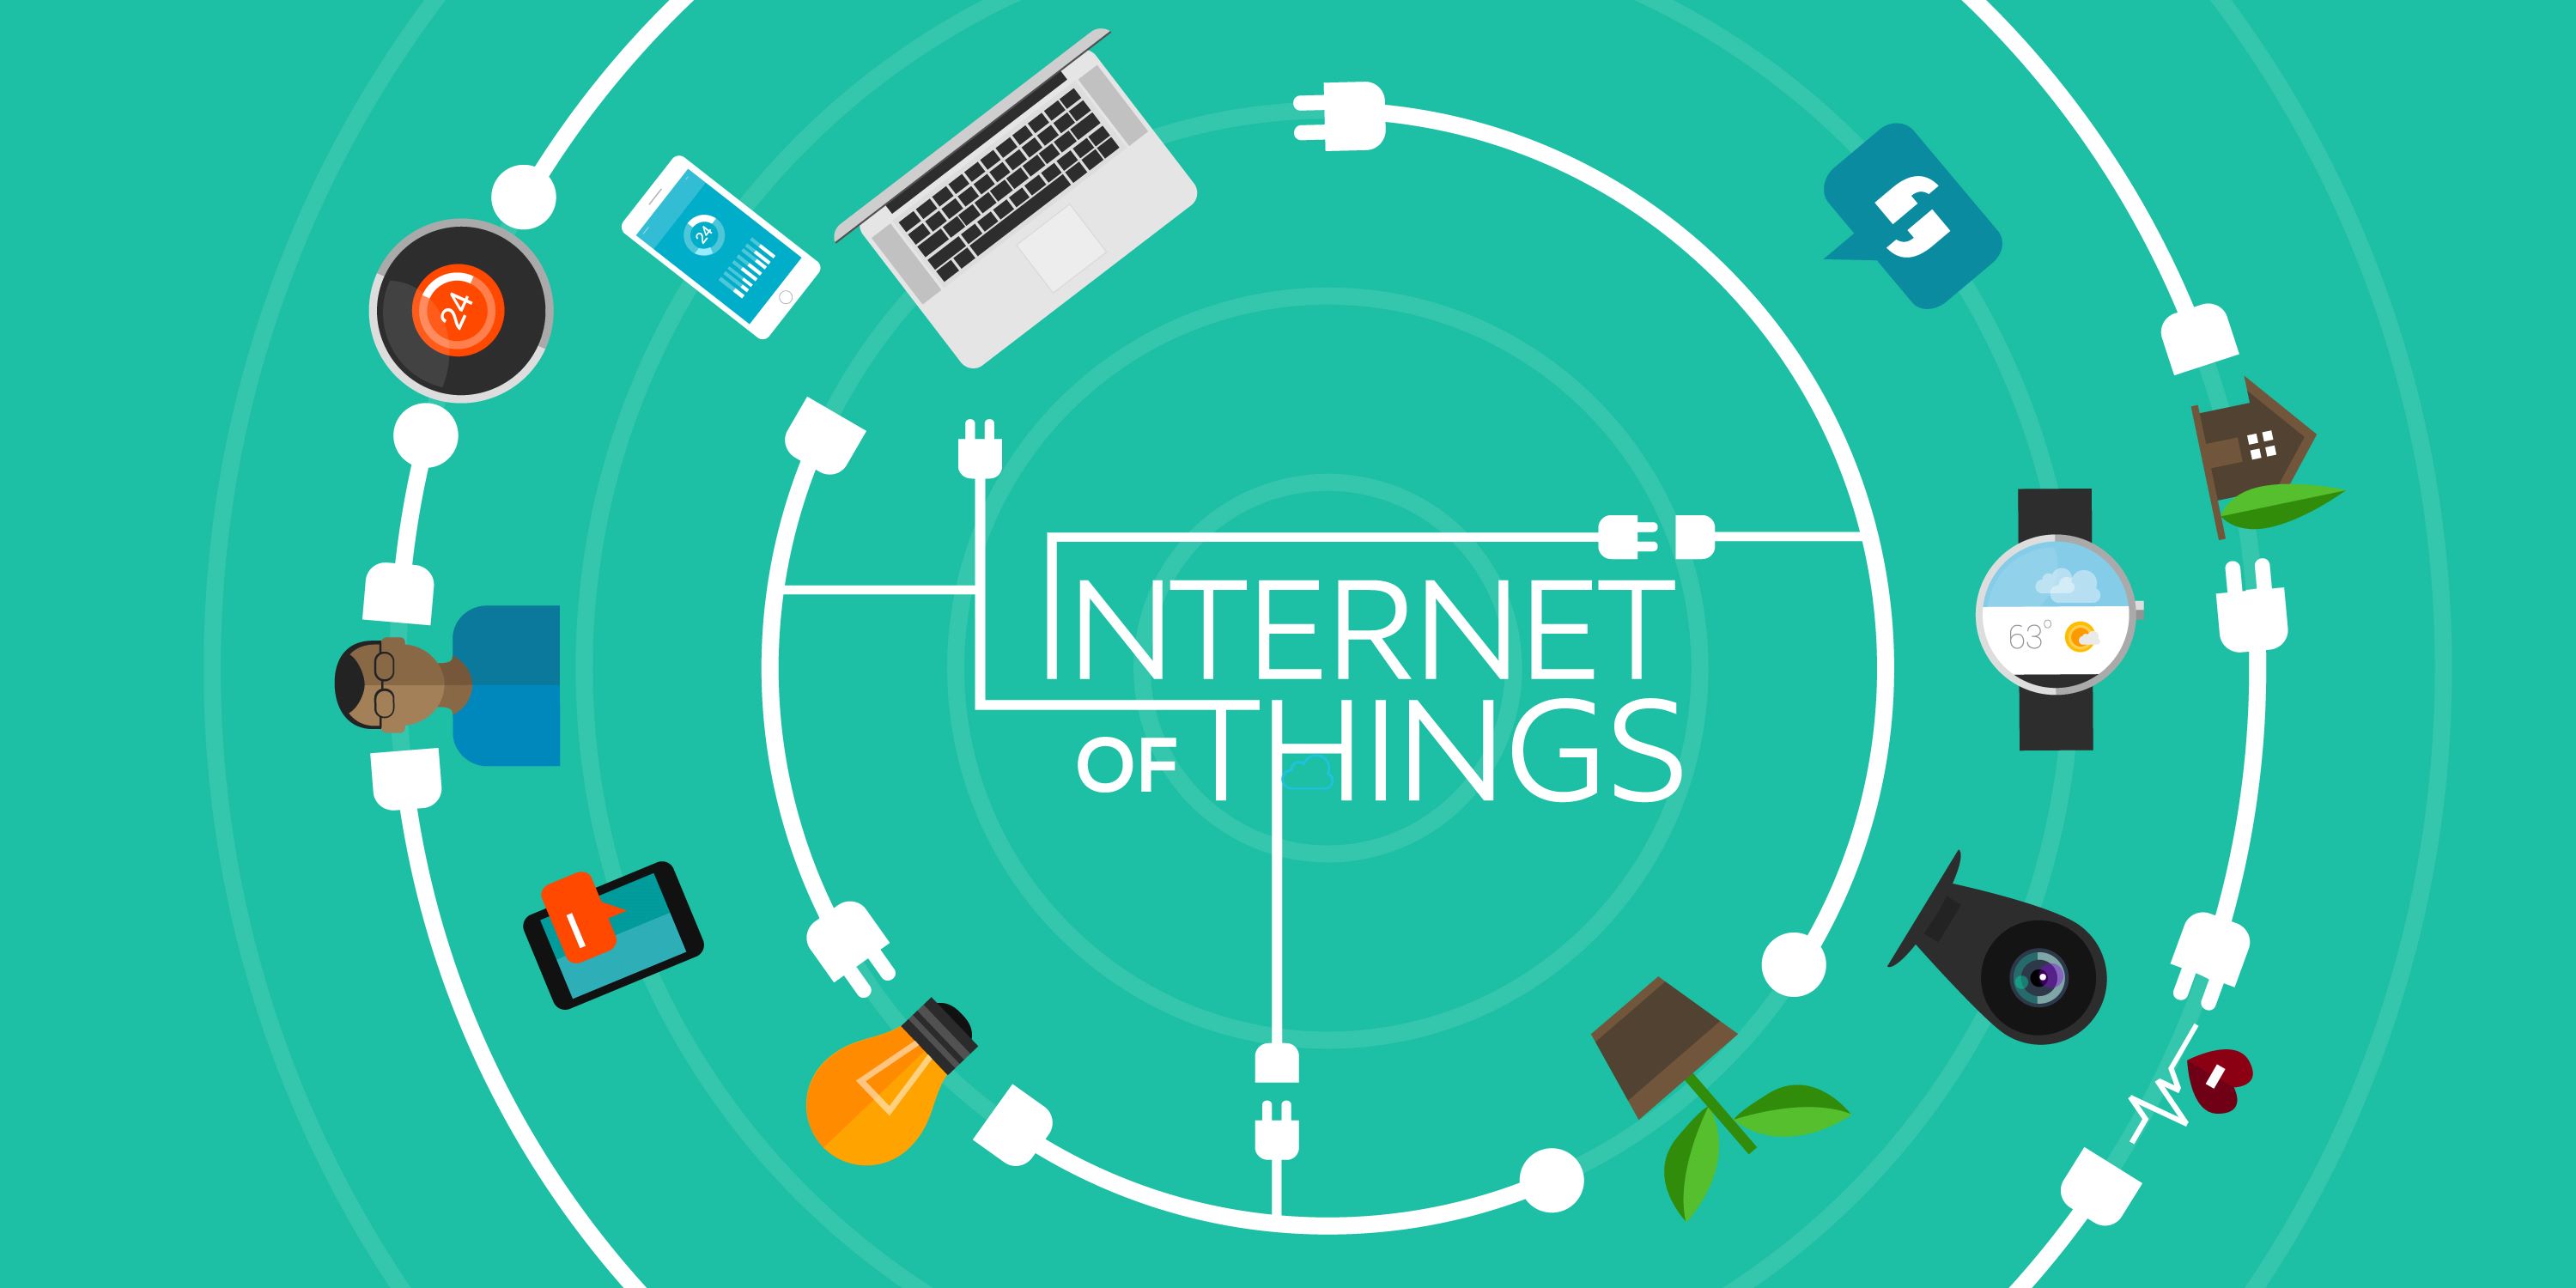 What Is The Internet Of Things (IoT)